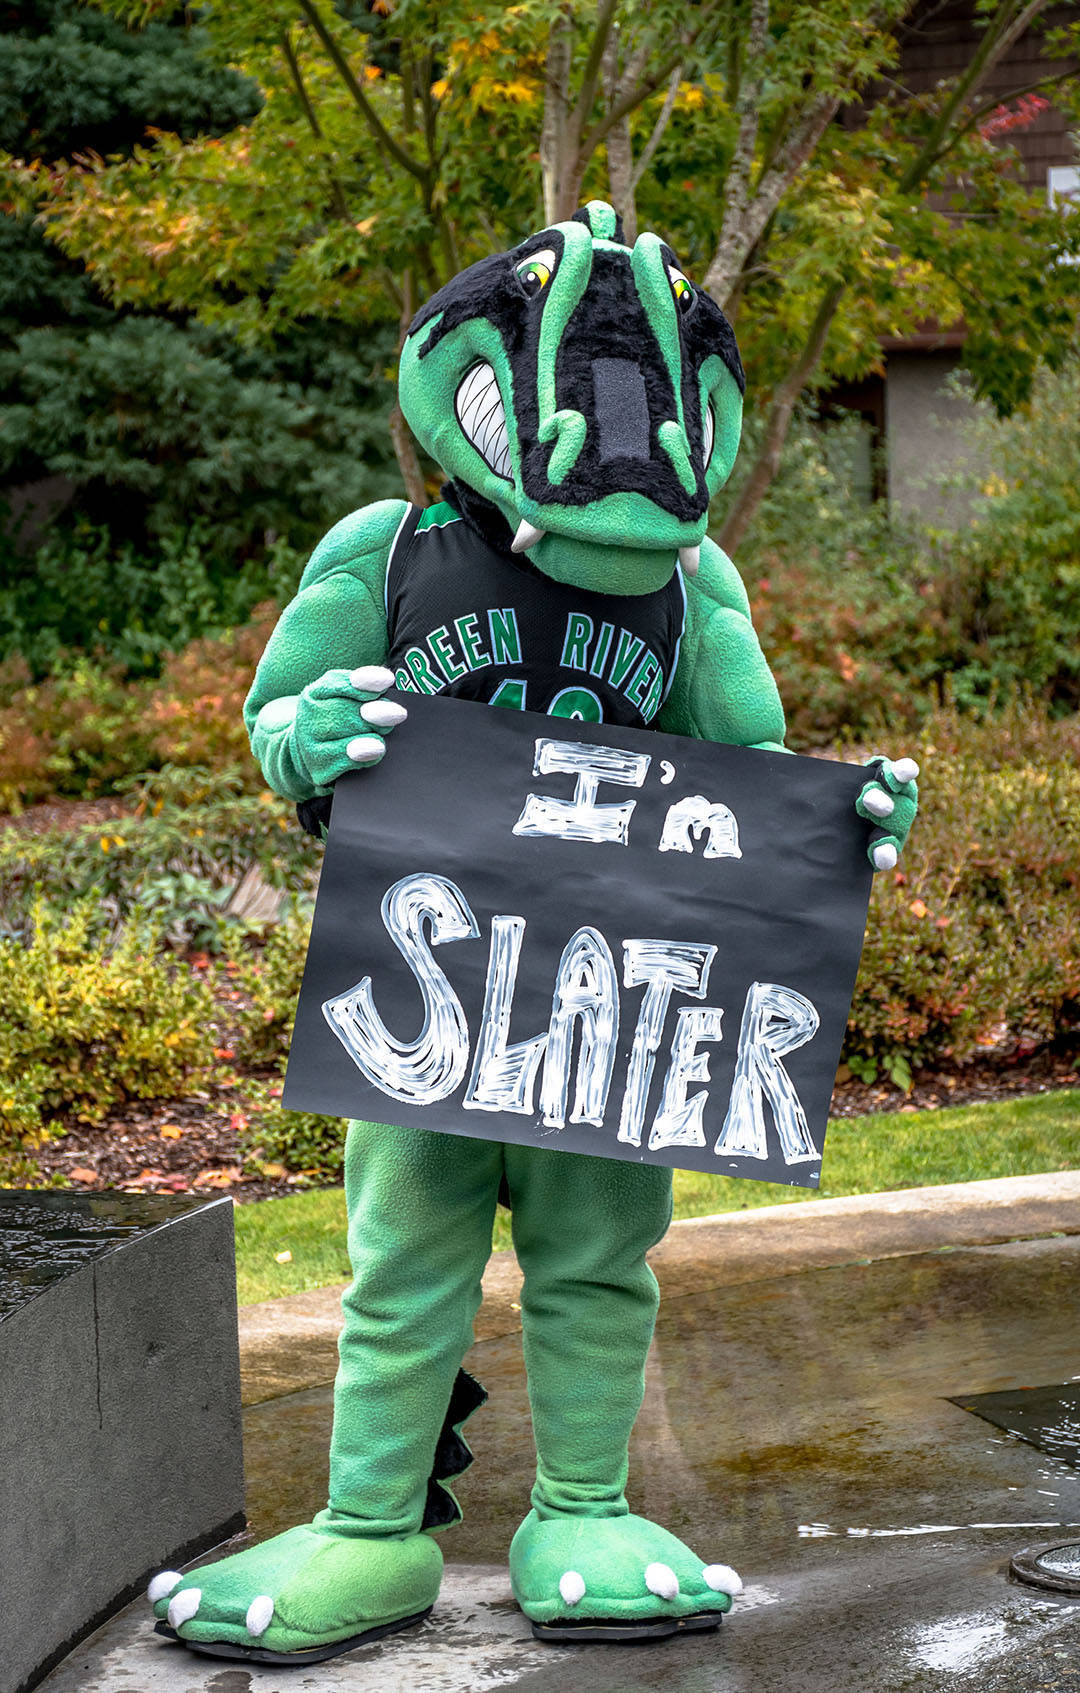 Meet Slater the Gator, the new mascot at Green River College. COURTESY PHOTO